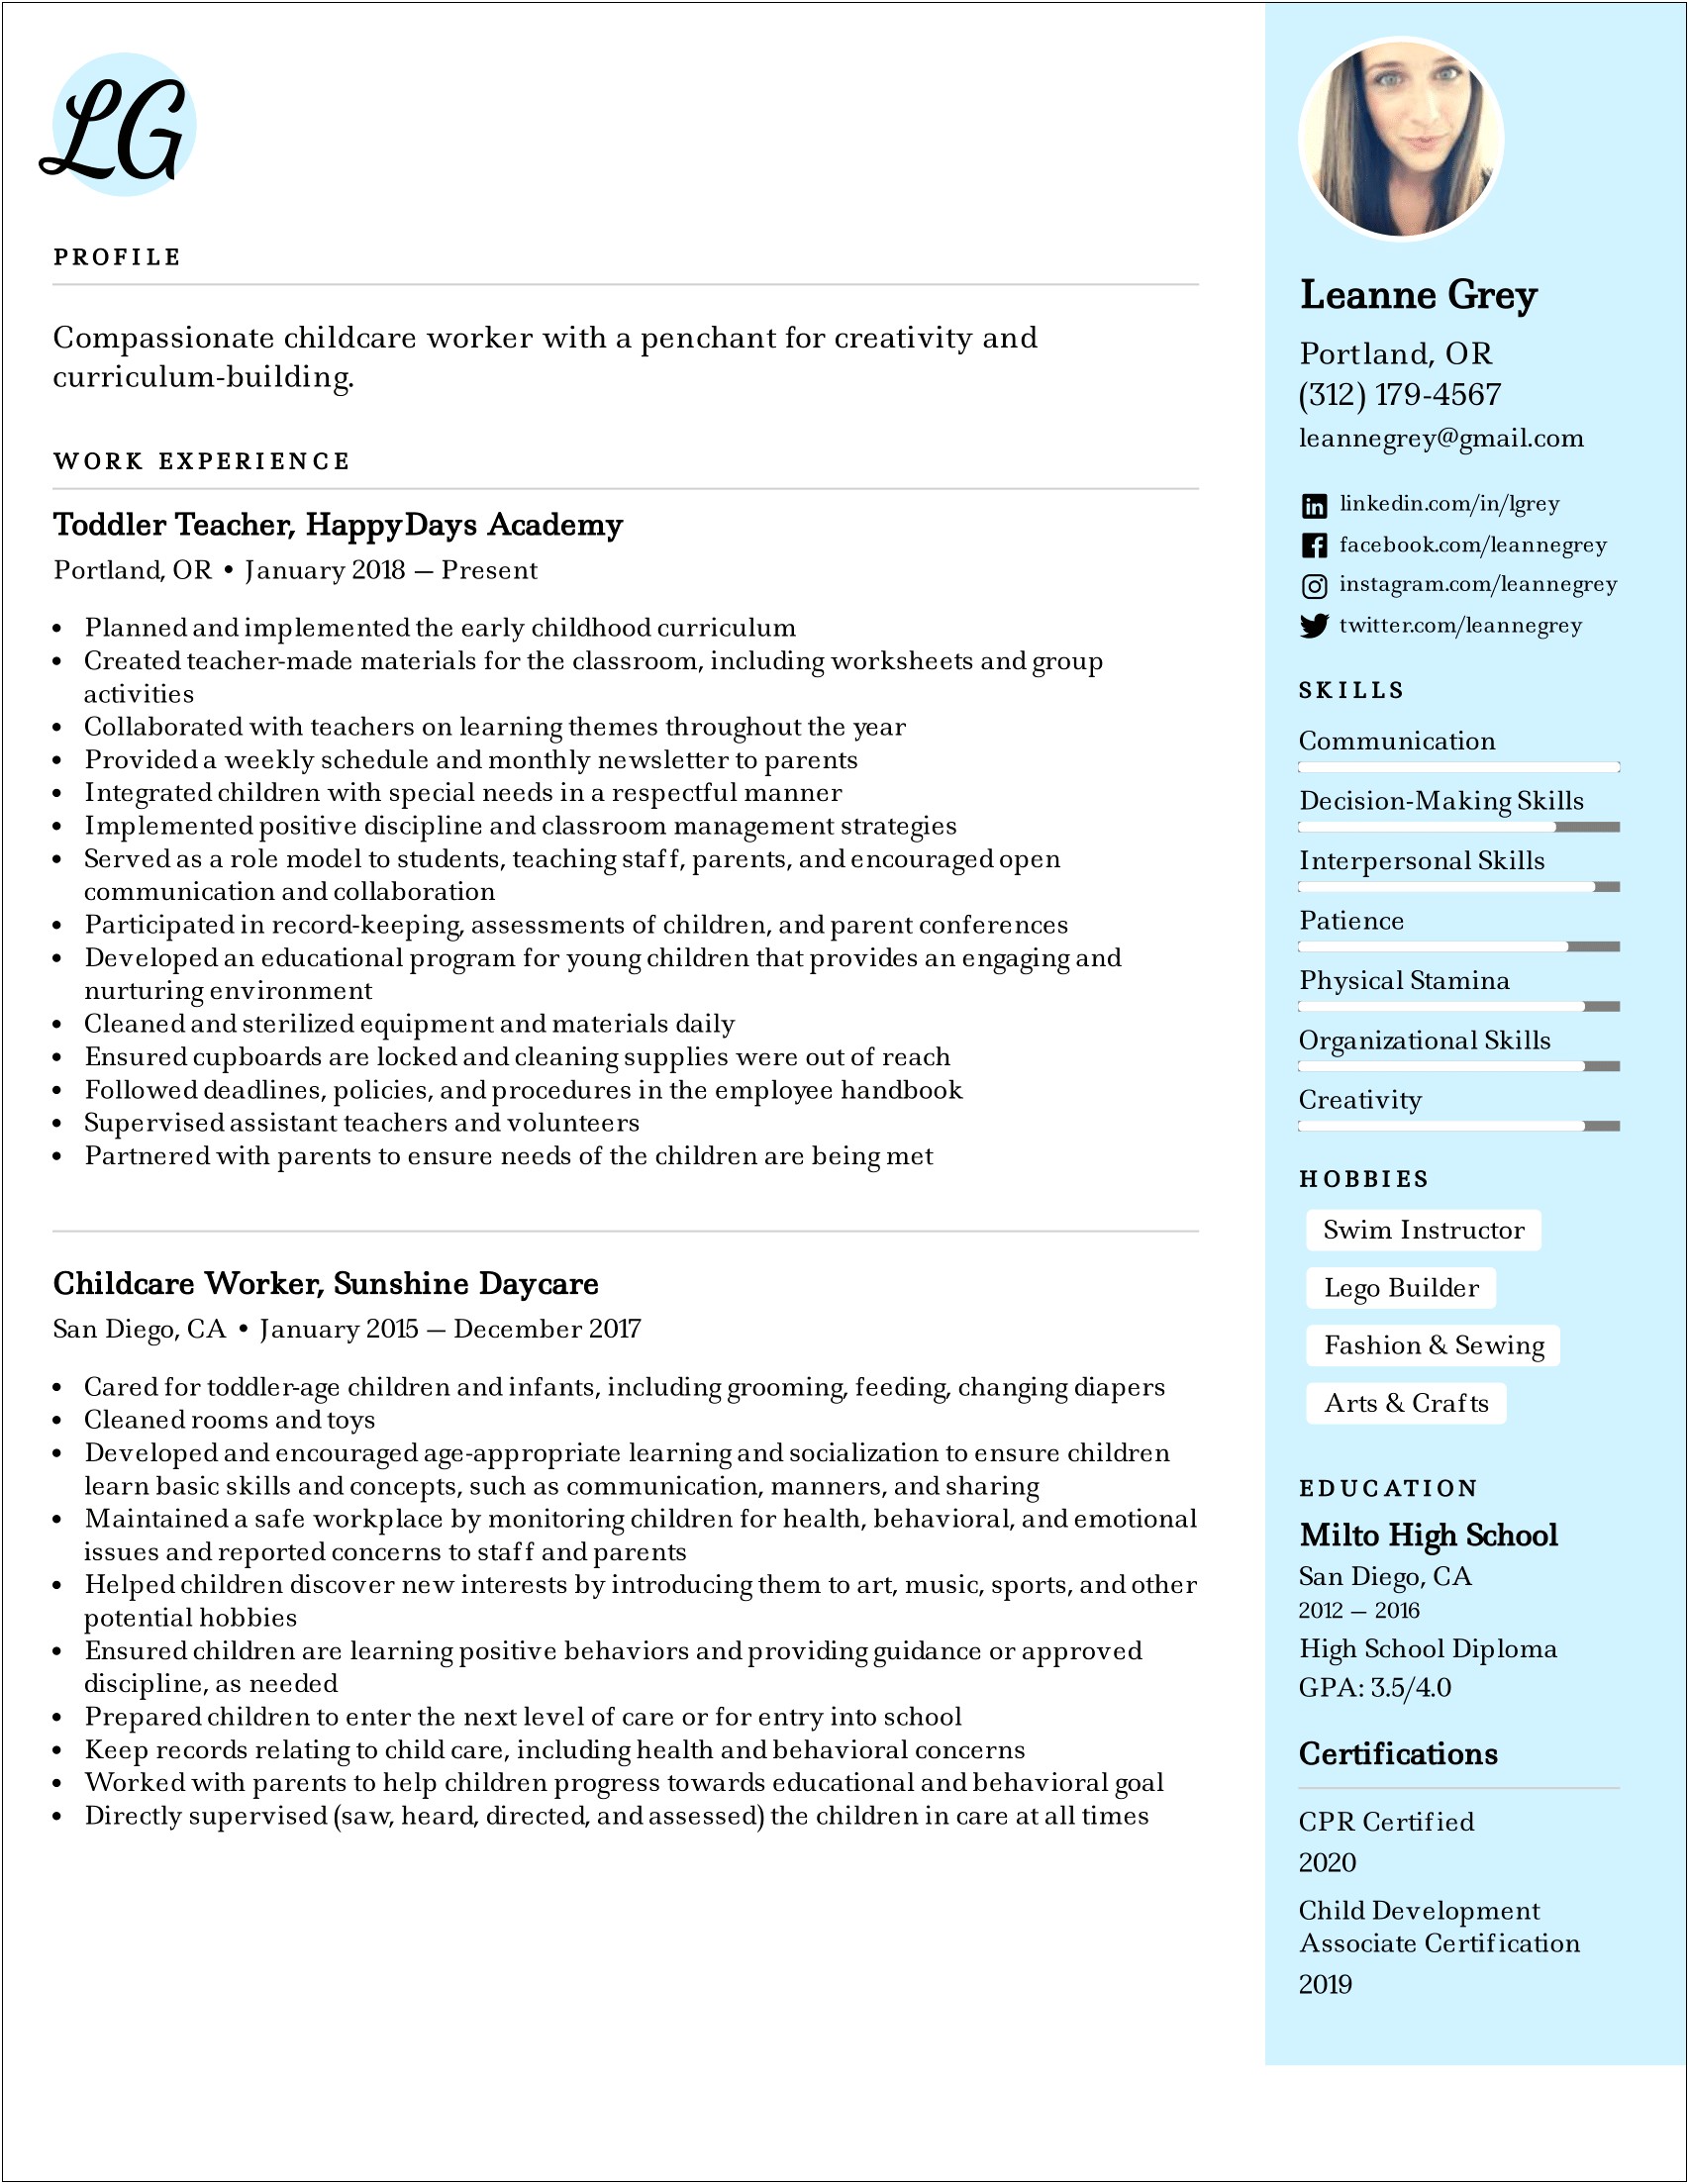 Resumes That Highlight Office Skills For Childcare Worker